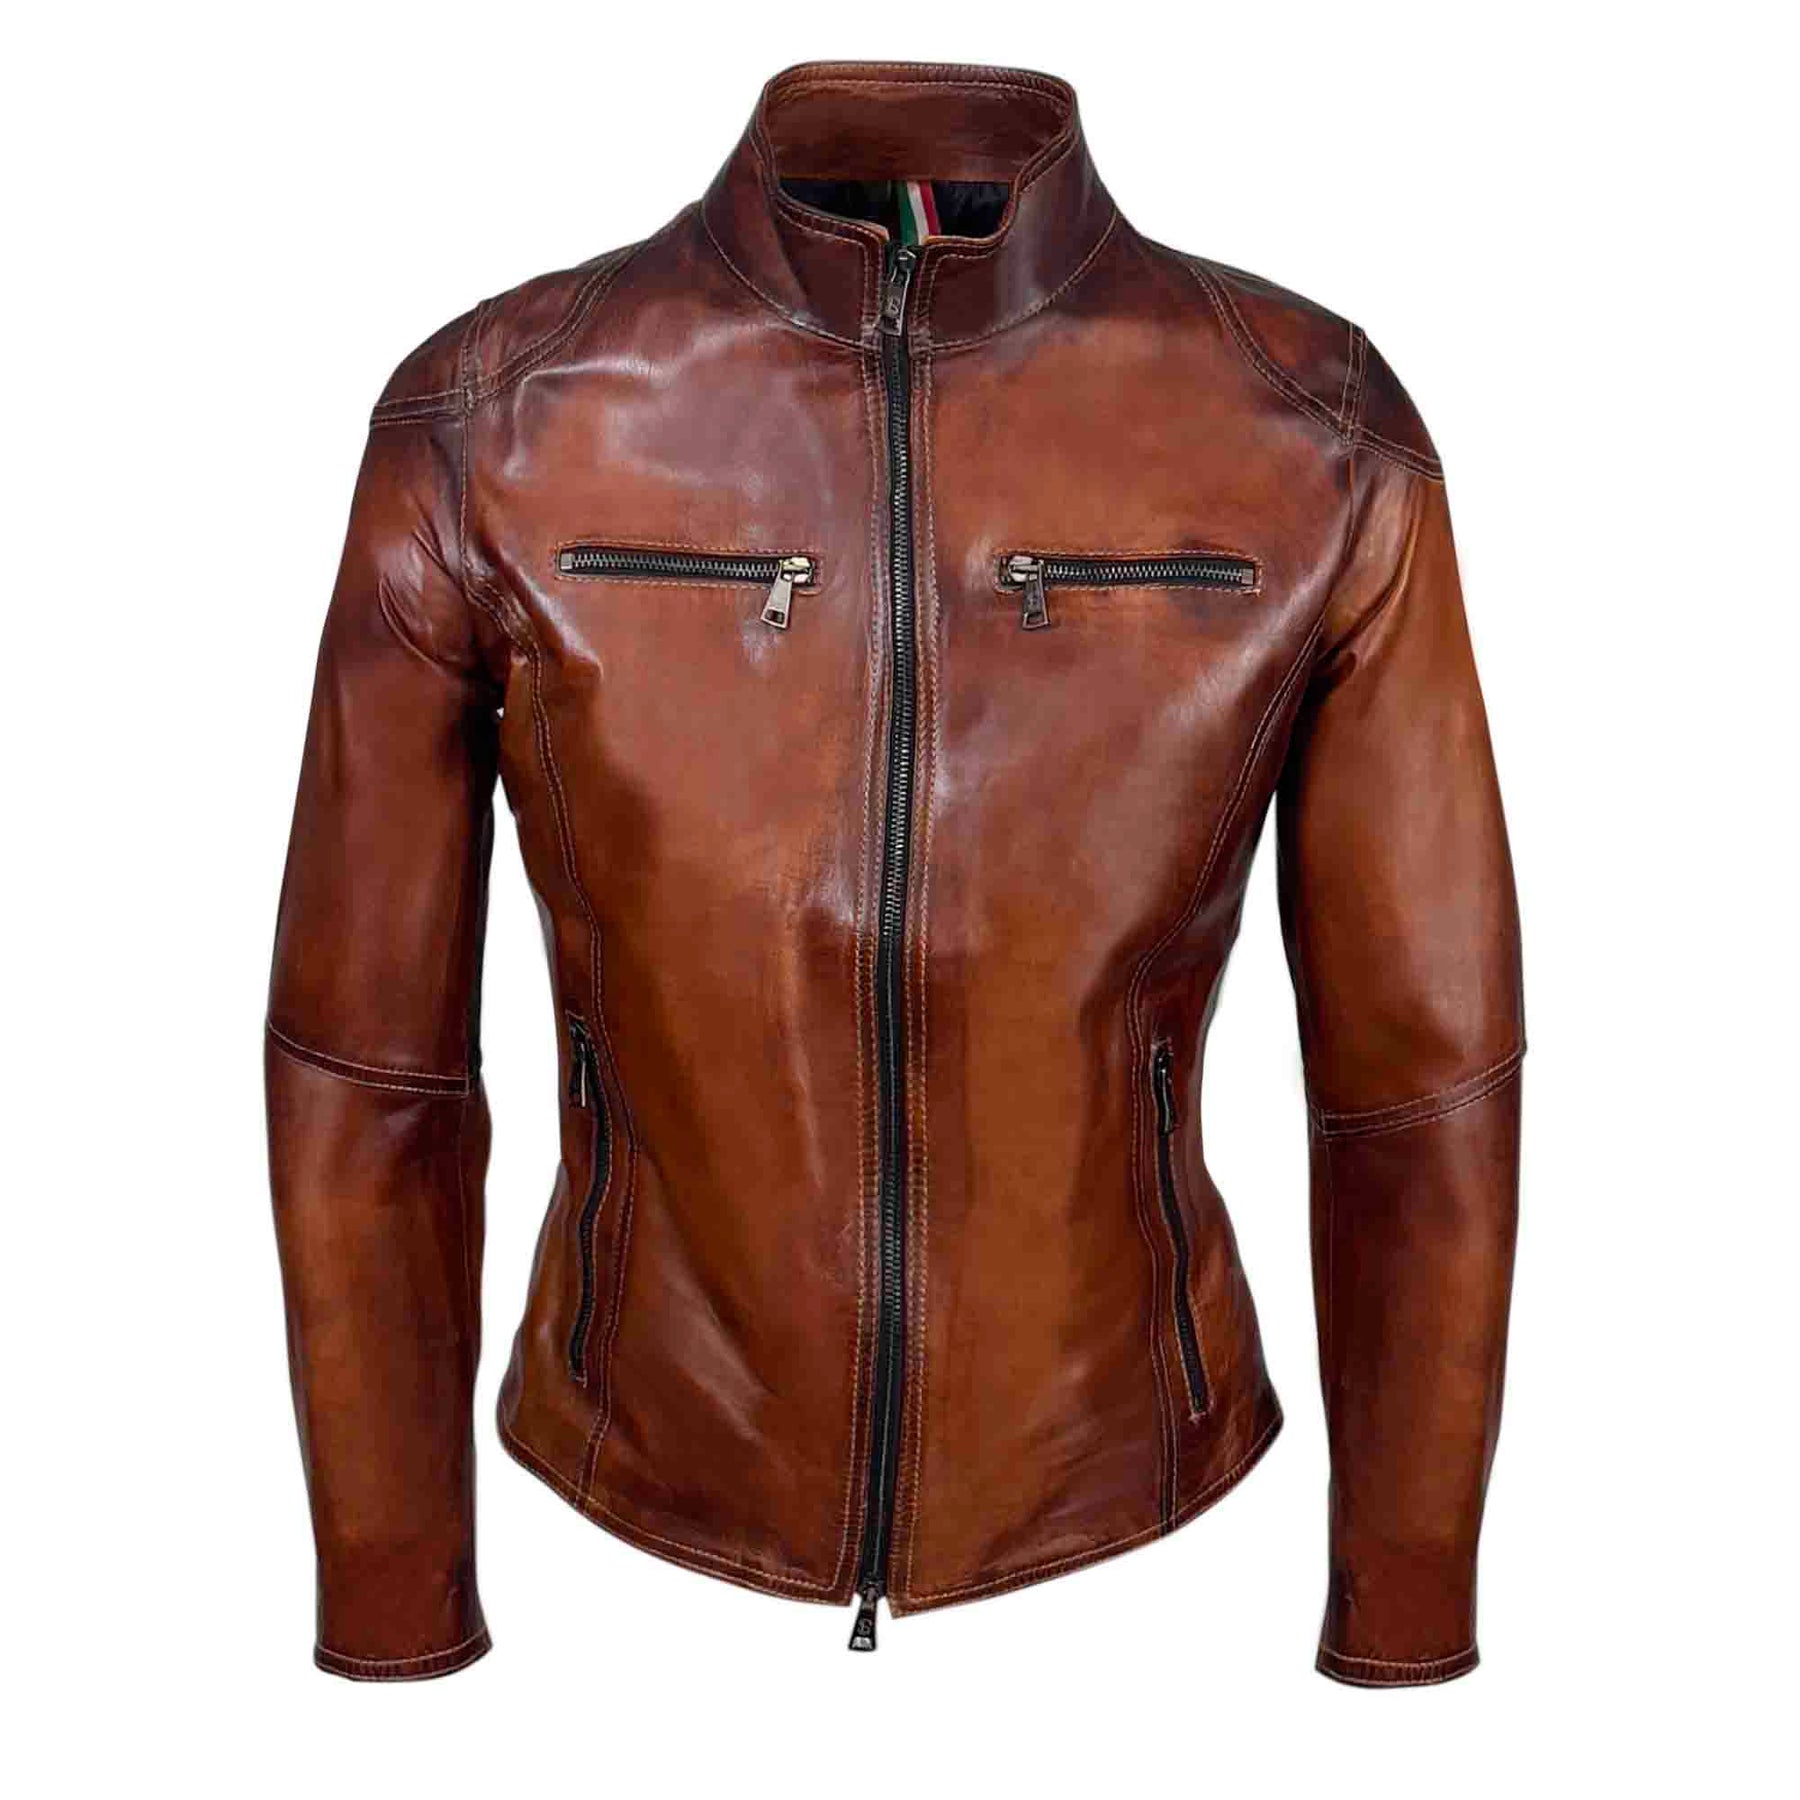 Women's high quality brown vegetable tanned leather jacket